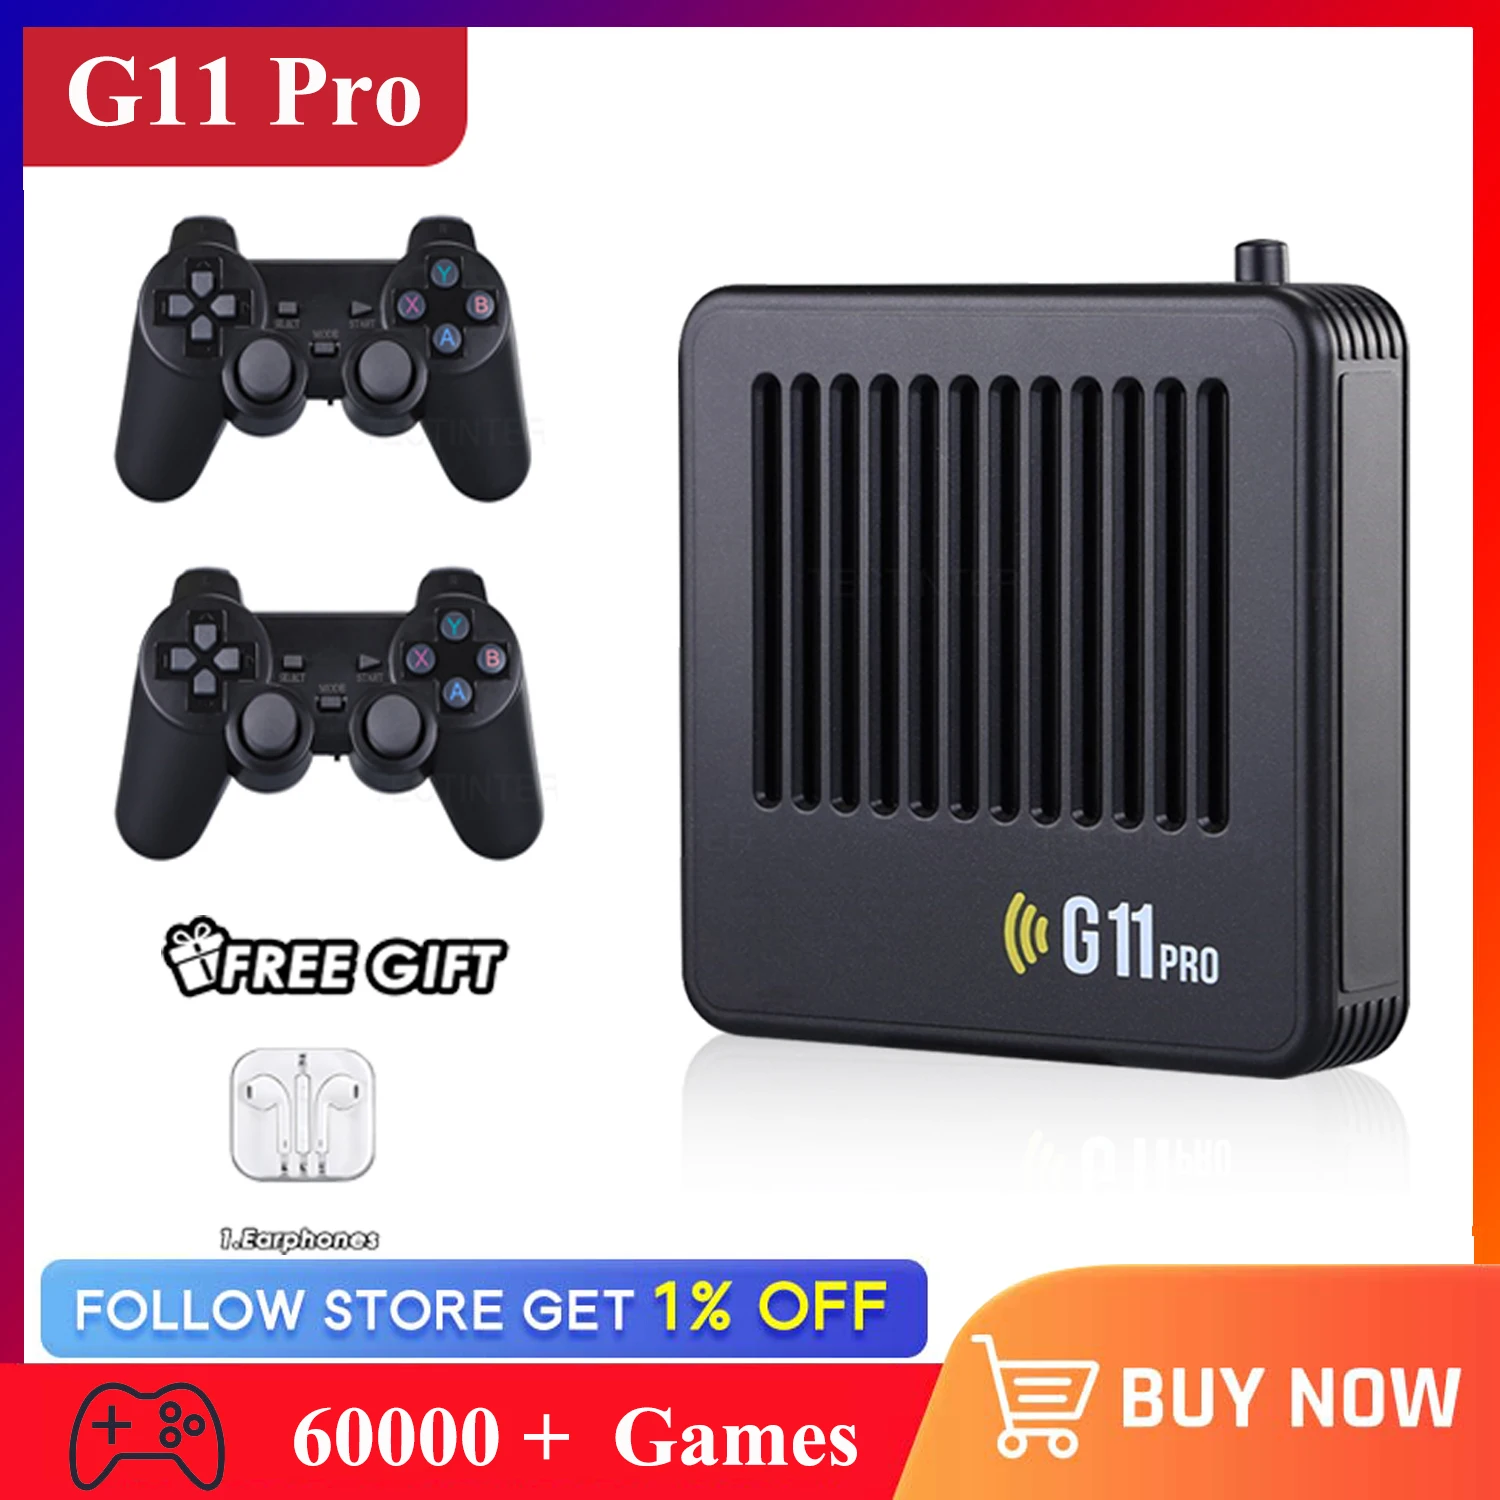 Ampown G11 Pro Retro Video Game Console Game Stick Gamepad 256G 4K HD TV 2.4G Wireless Double Controller 60000+ Games for PSP